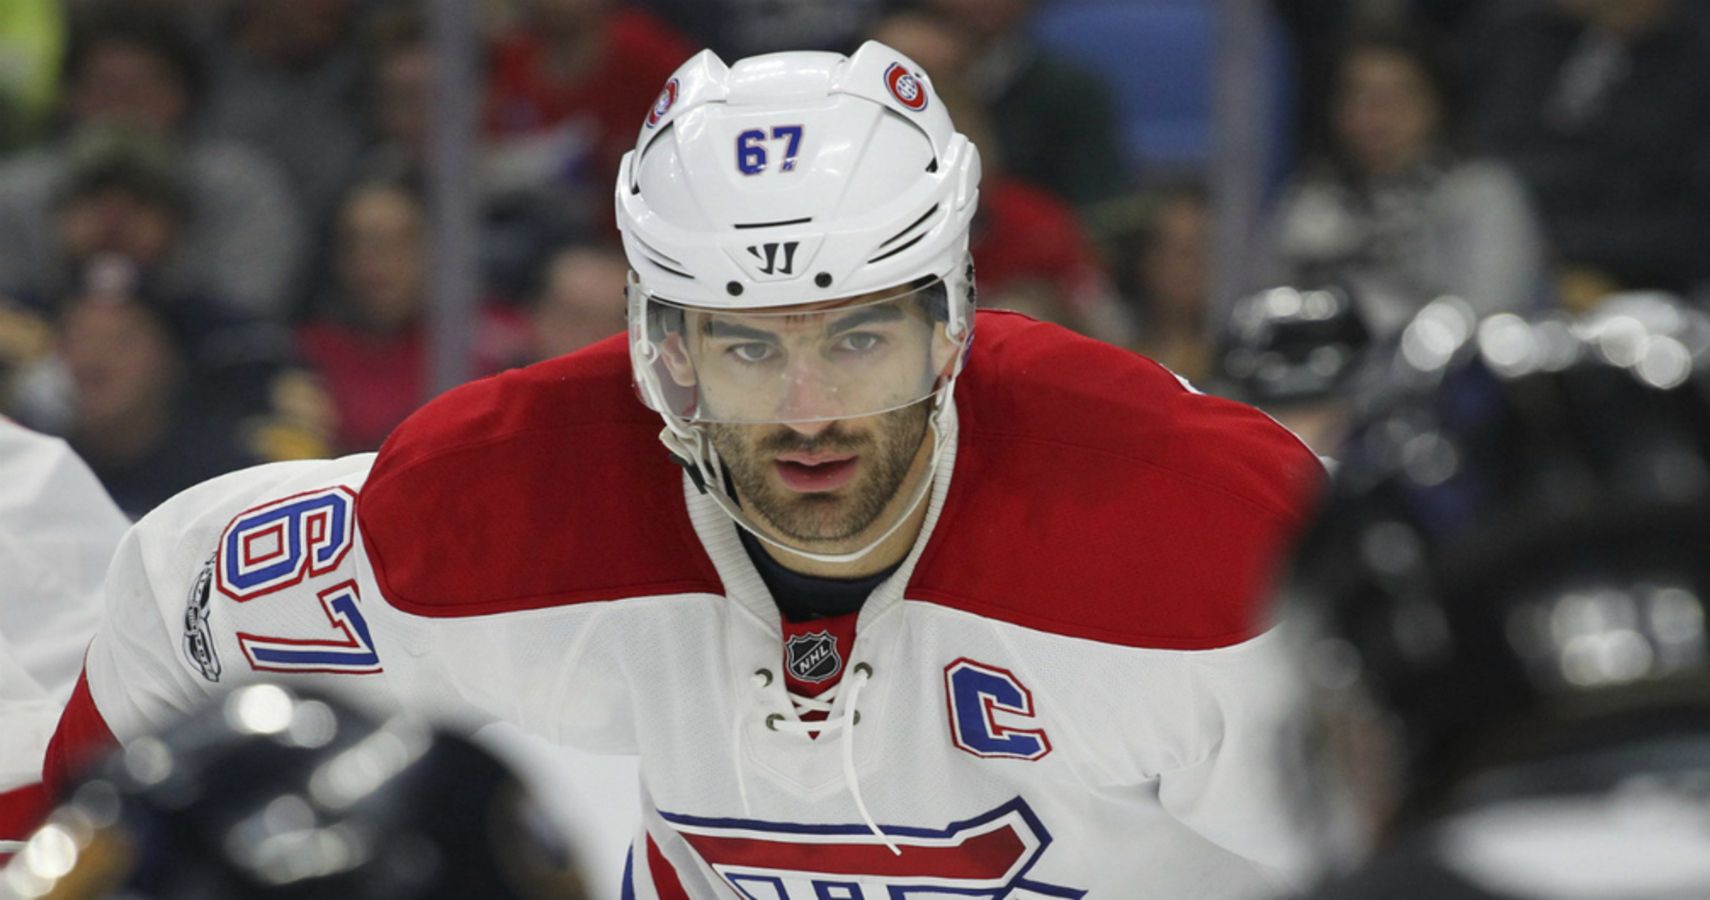 Canadiens' Max Pacioretty out 4-6 weeks with knee injury